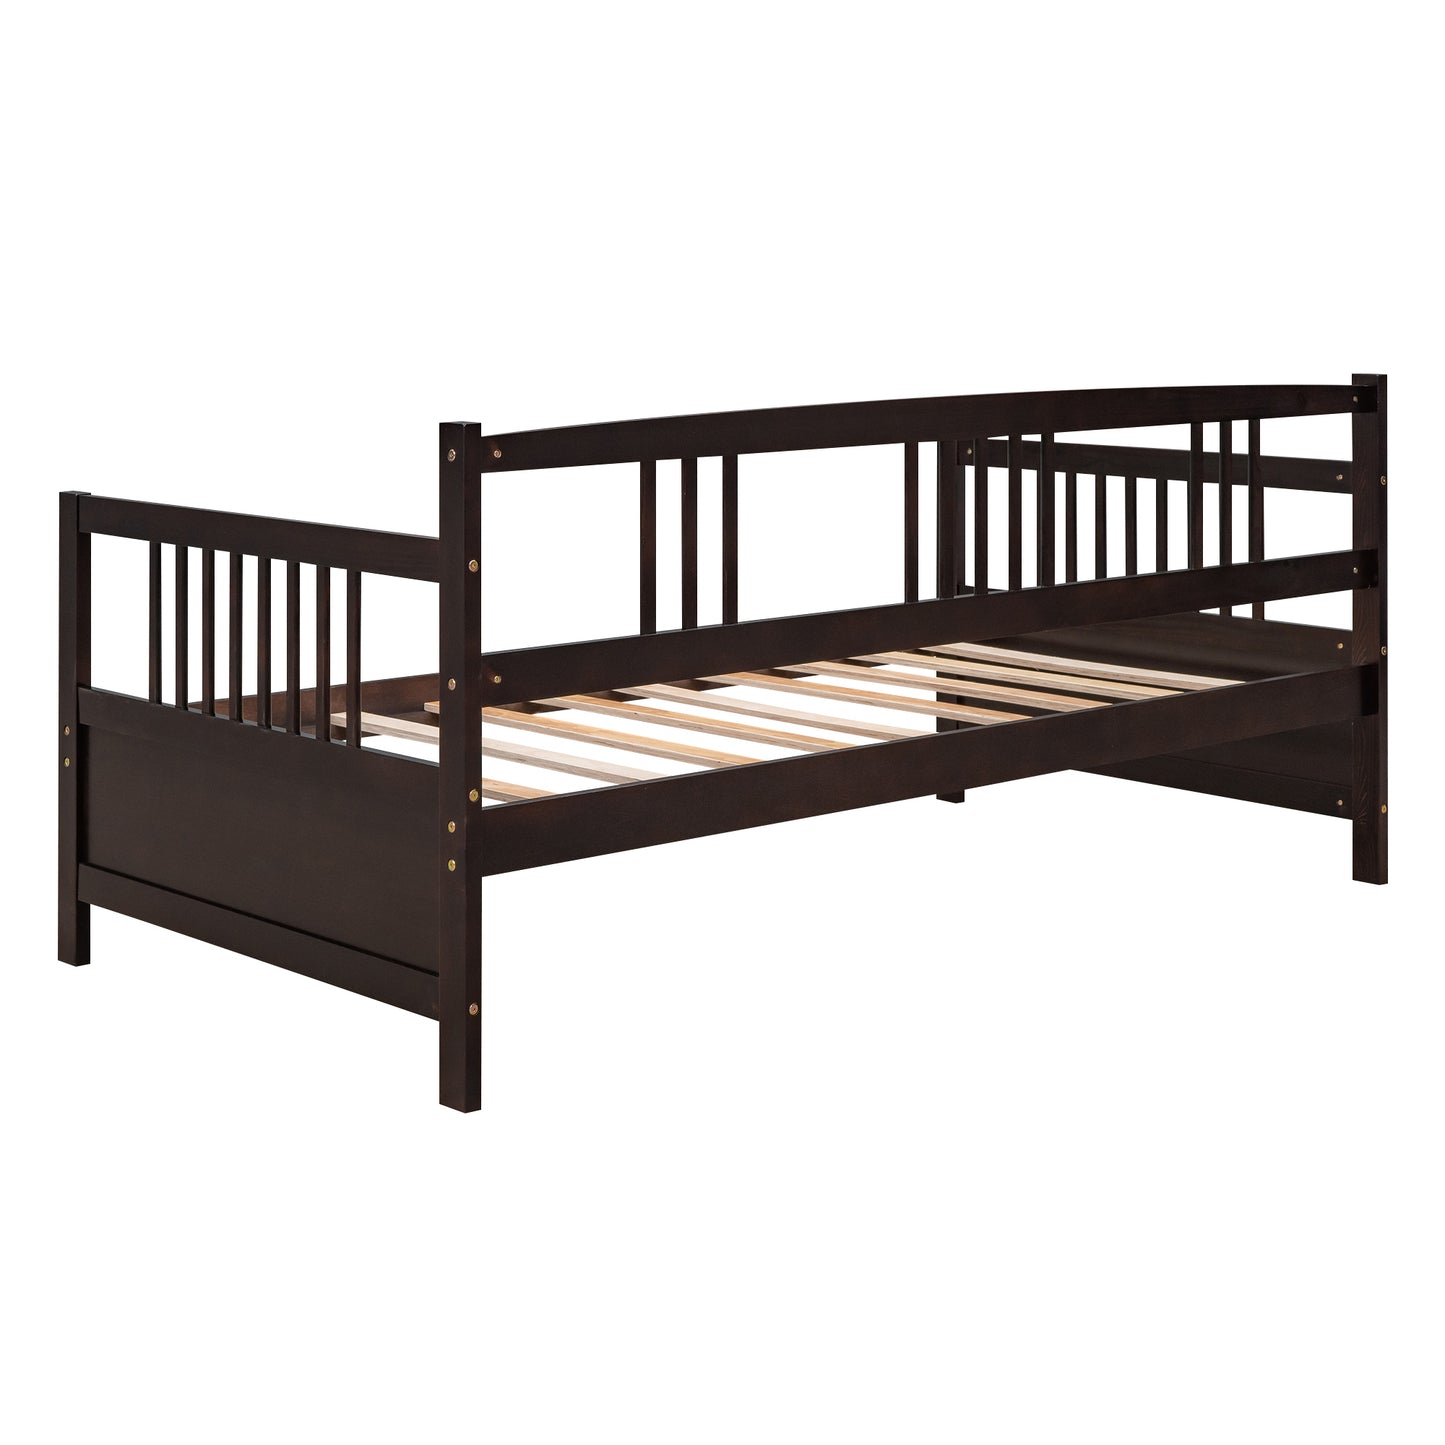 Modern Solid Wood Daybed, Multifunctional, Twin Size, Espresso (Previous SKU: WF191899AAP)